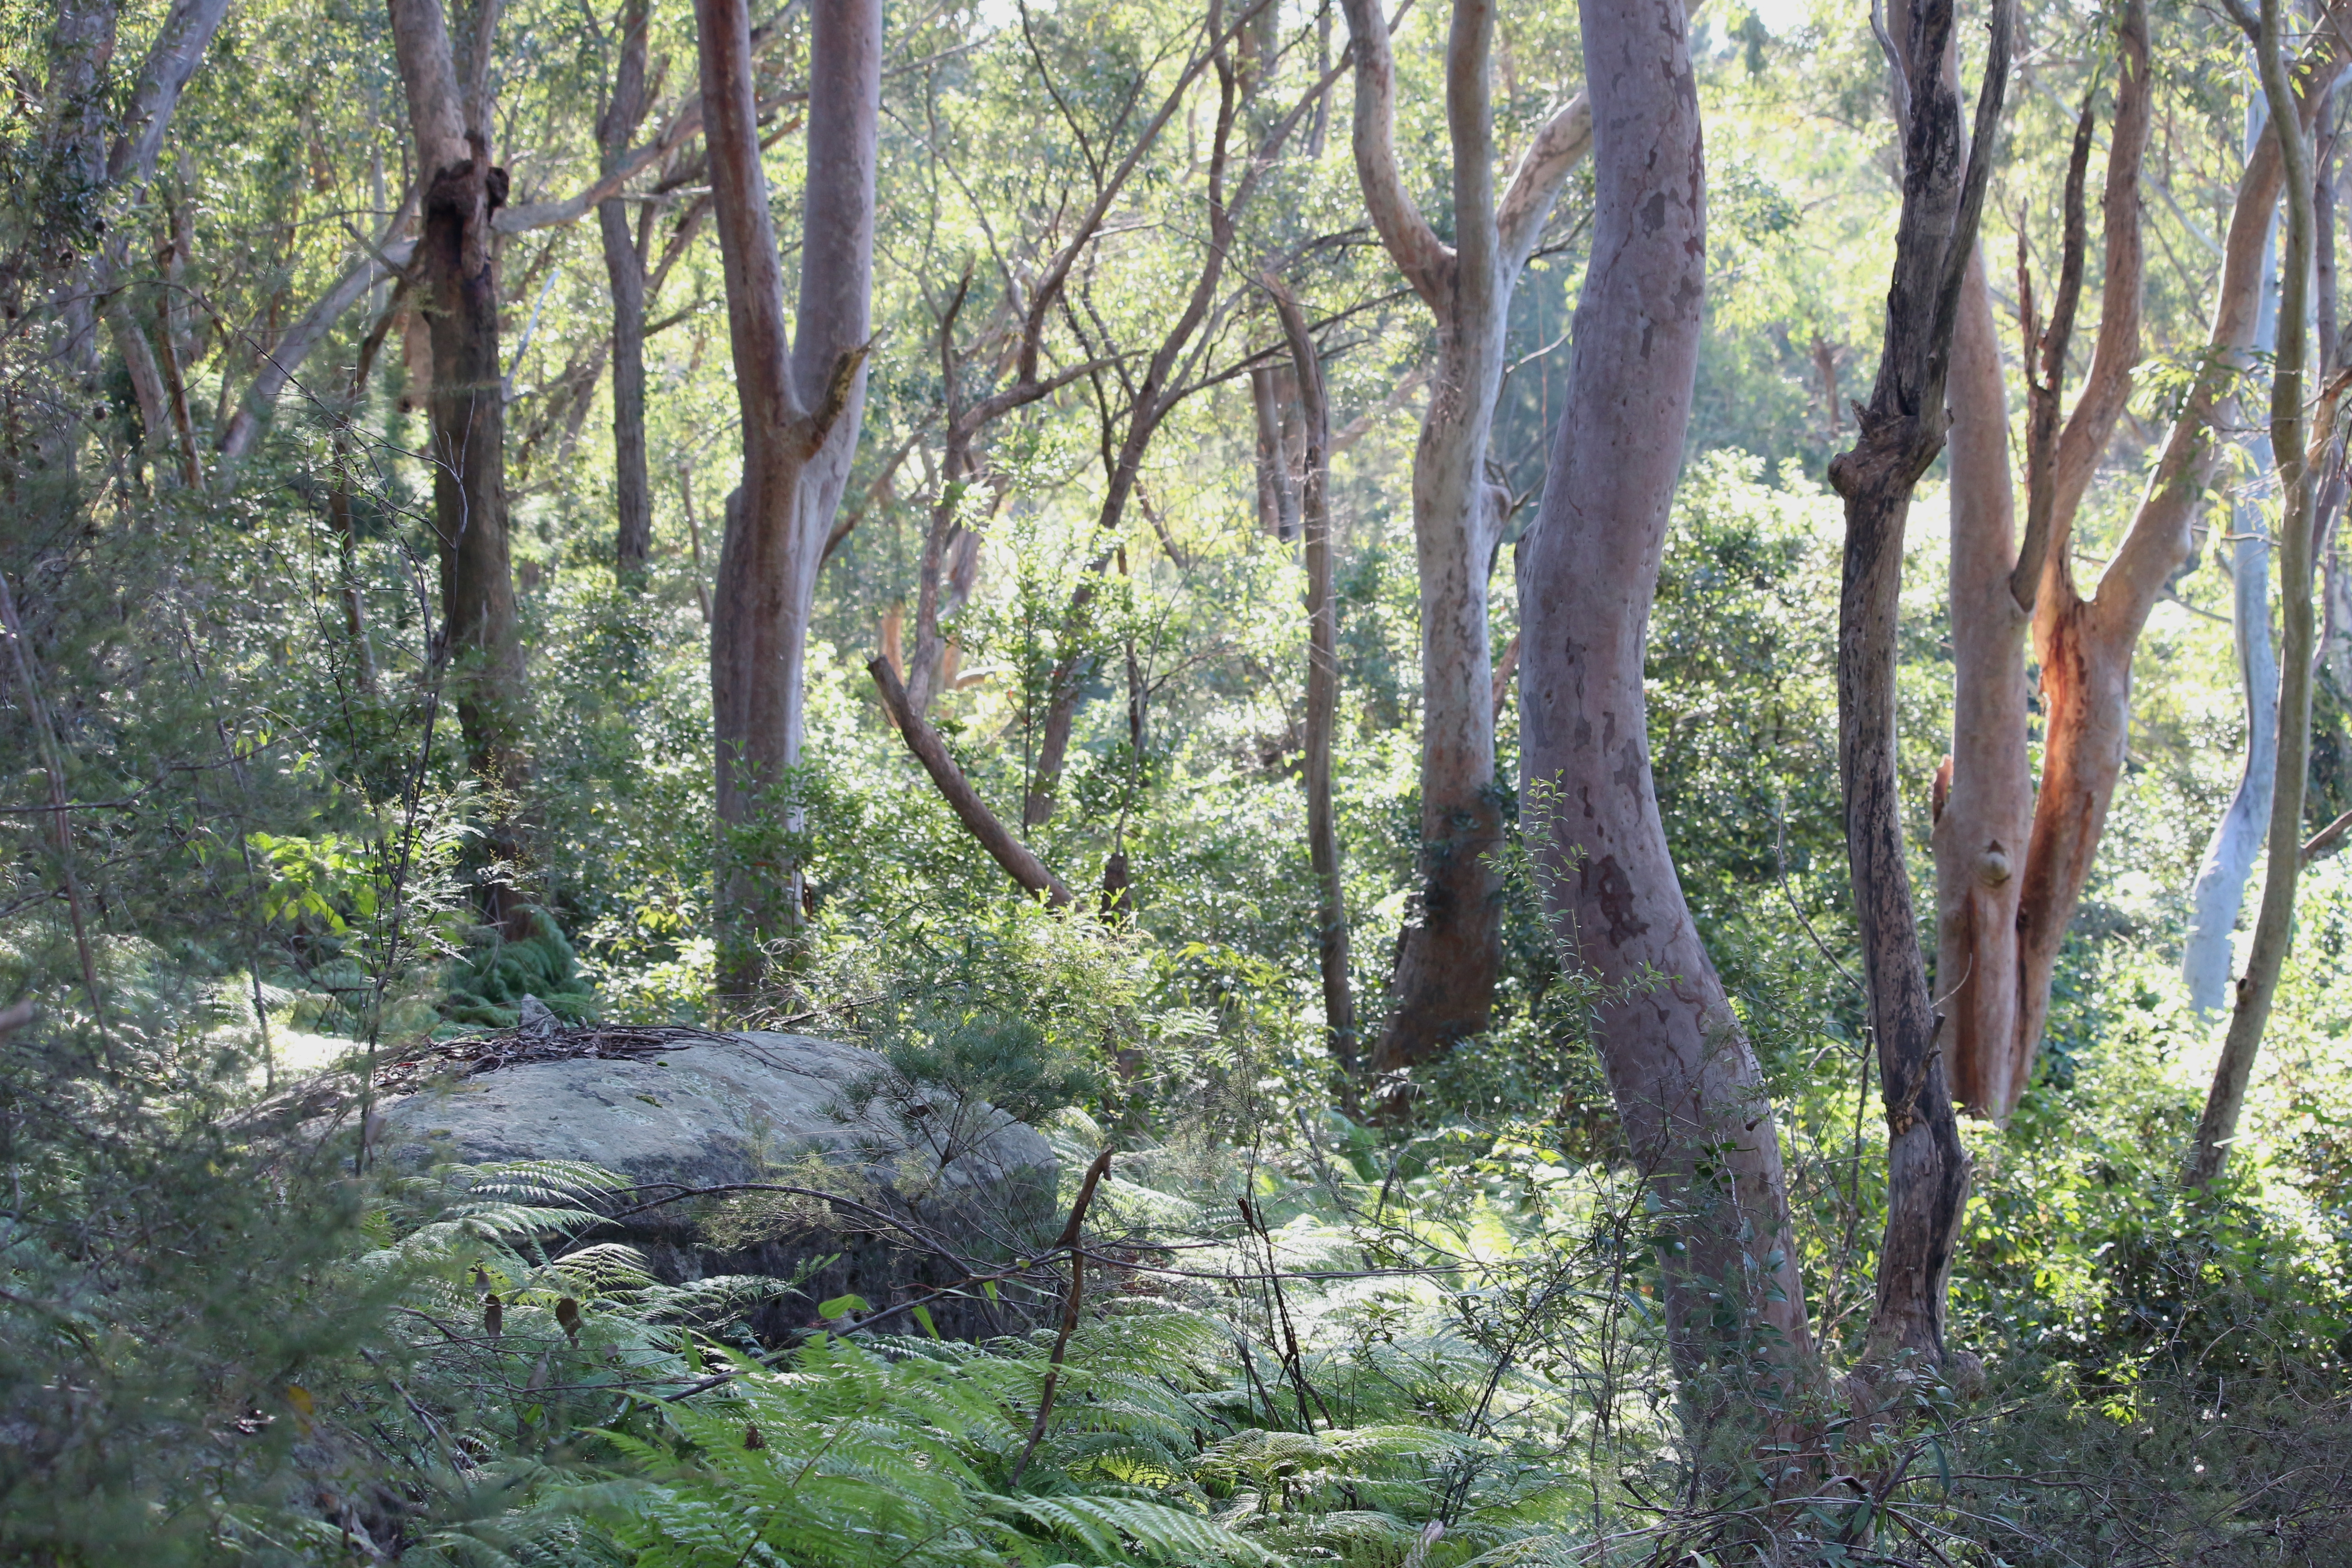 Lots of gum trees close together with thick undergrowth made up of bracken, ferns and lots of other shrubs and grasses. It looks thick and dense.